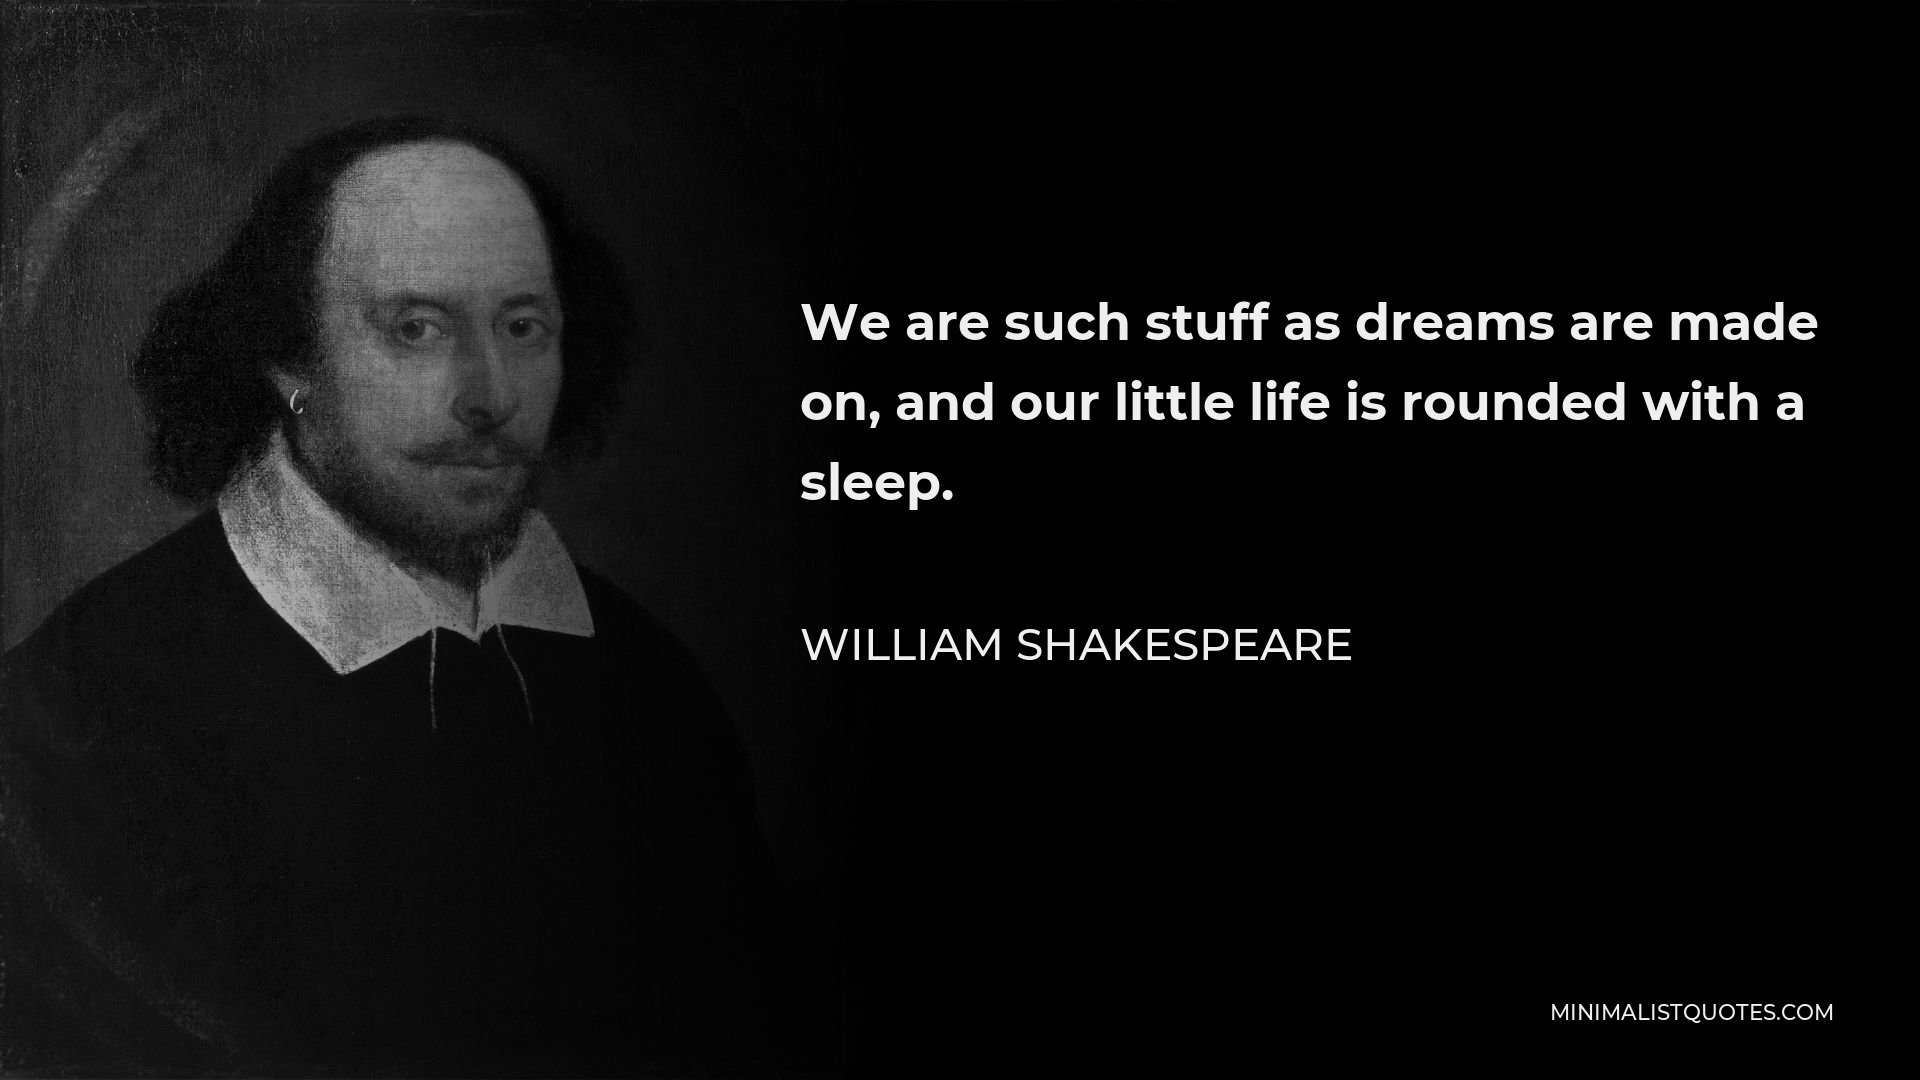 William Shakespeare Quote - We are such stuff as dreams are made on, and our little life is rounded with a sleep.